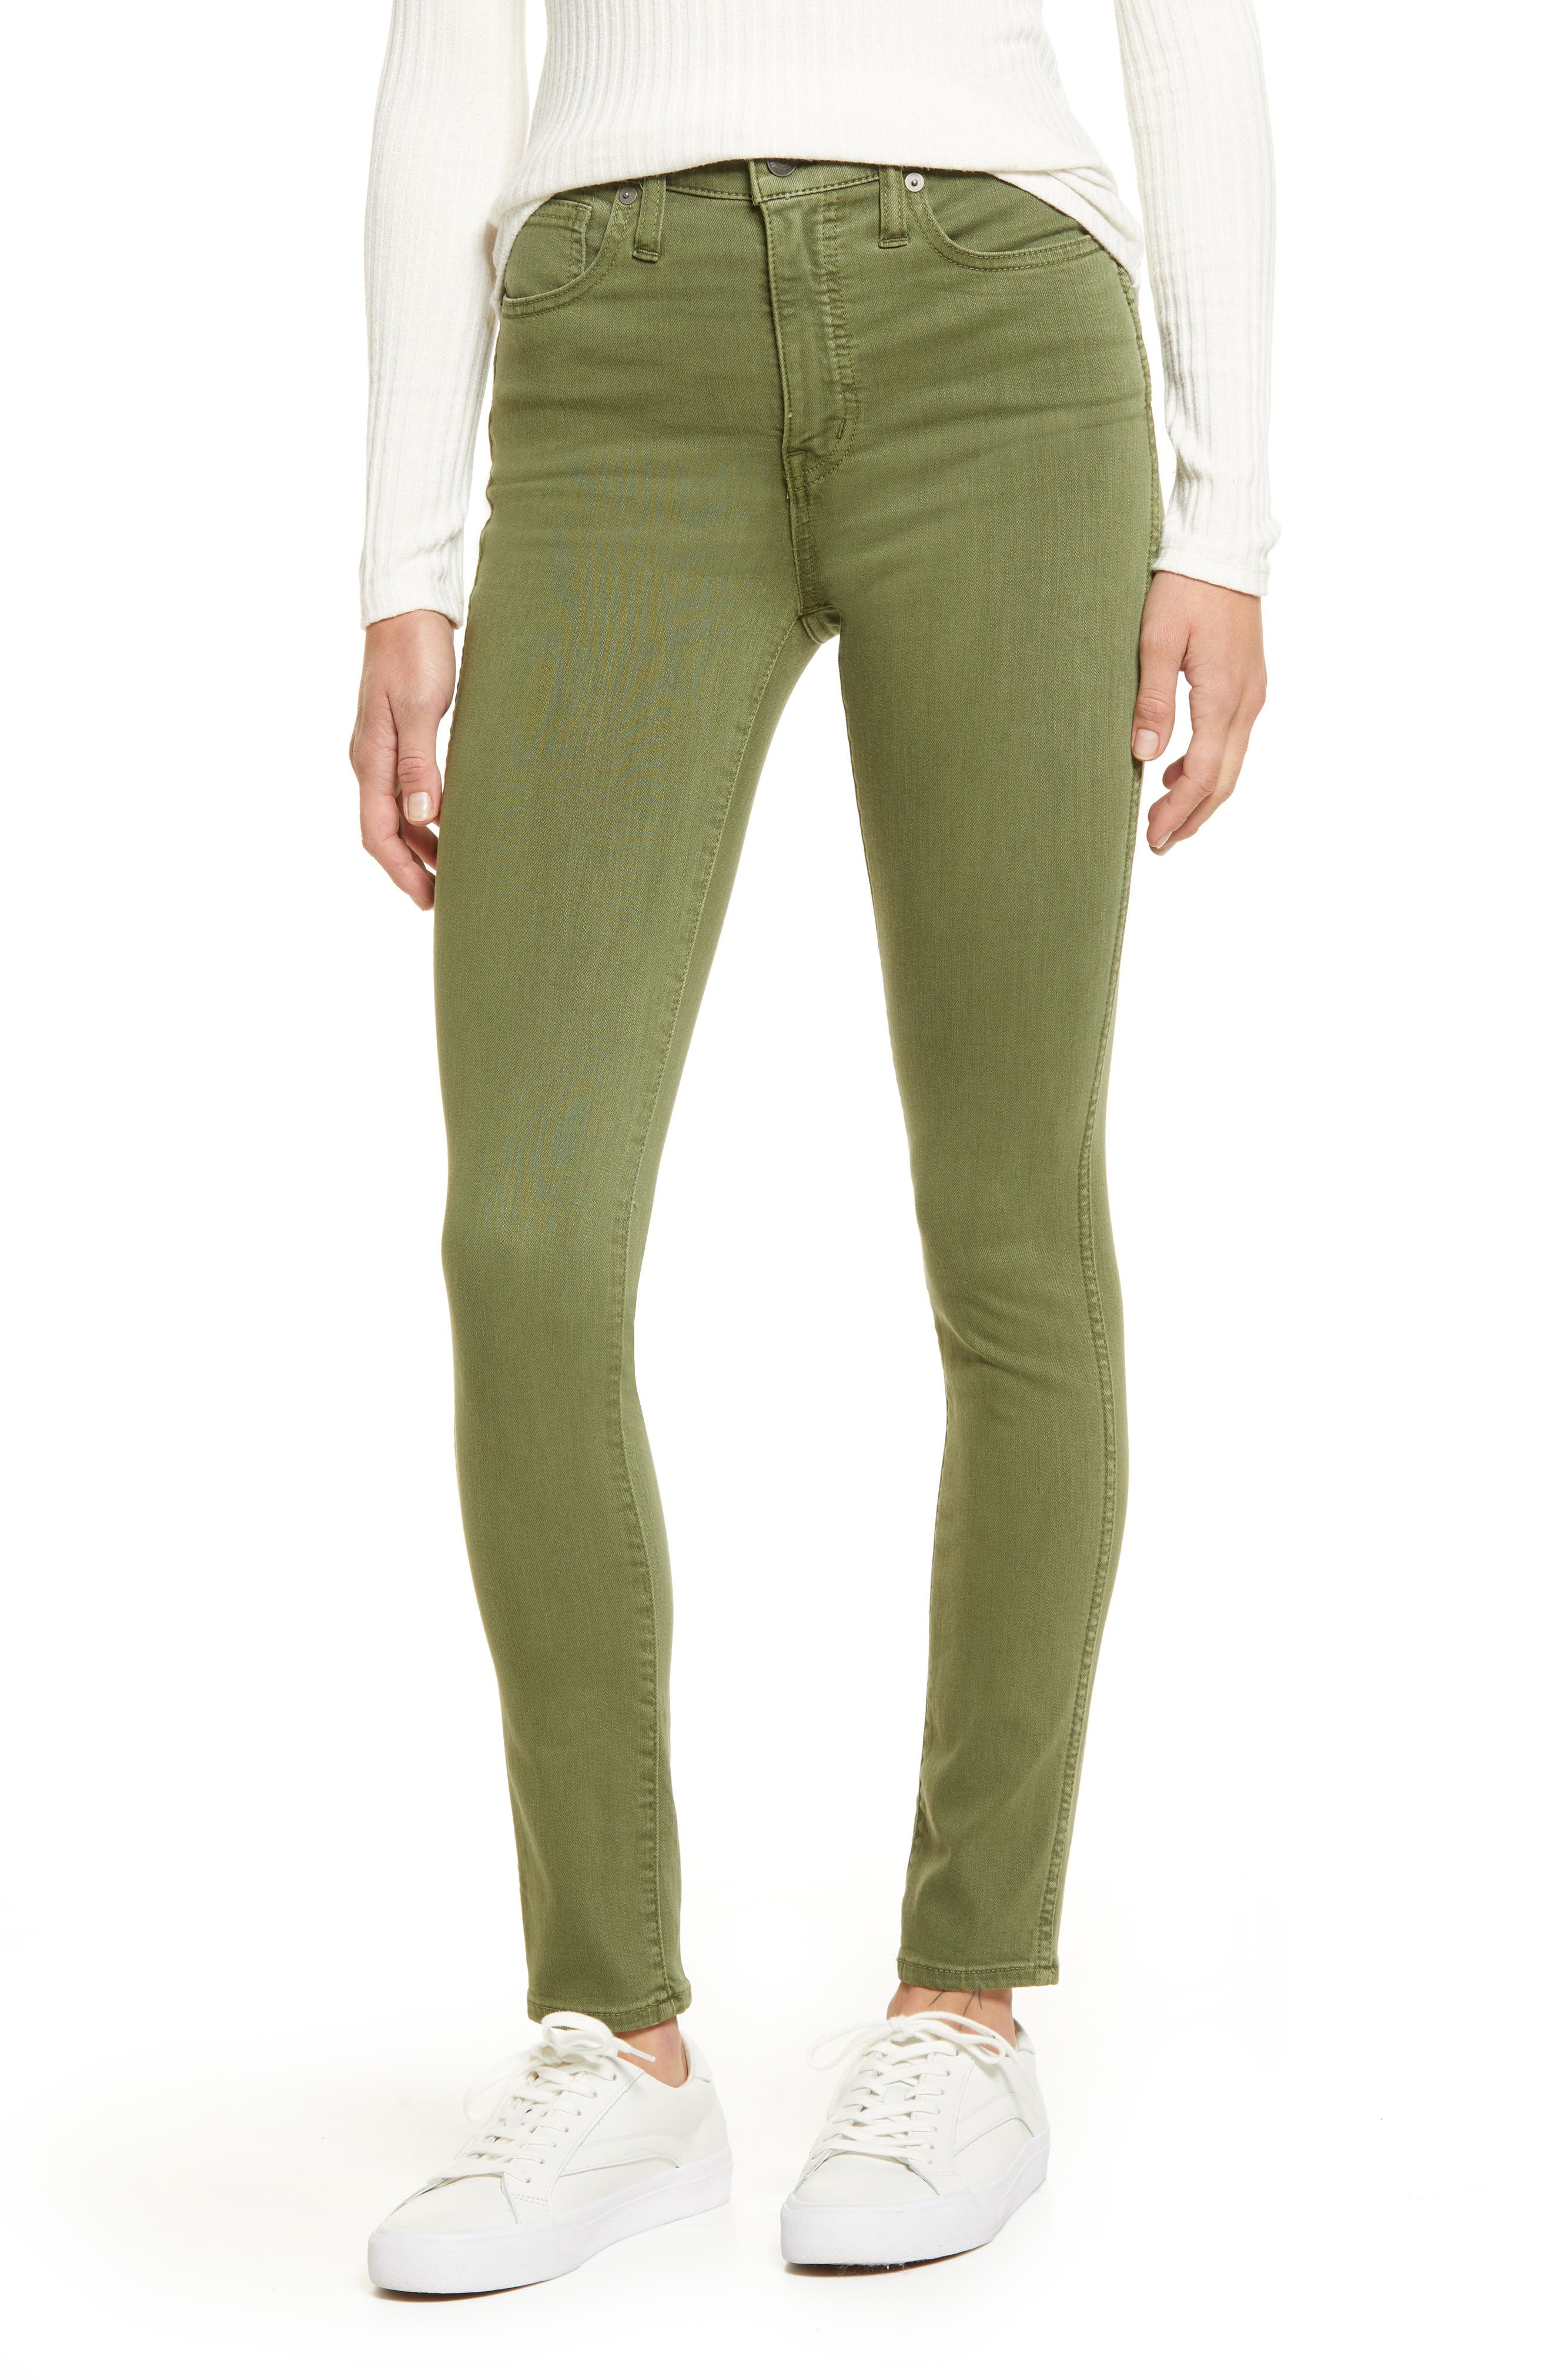 high rise olive green jeans